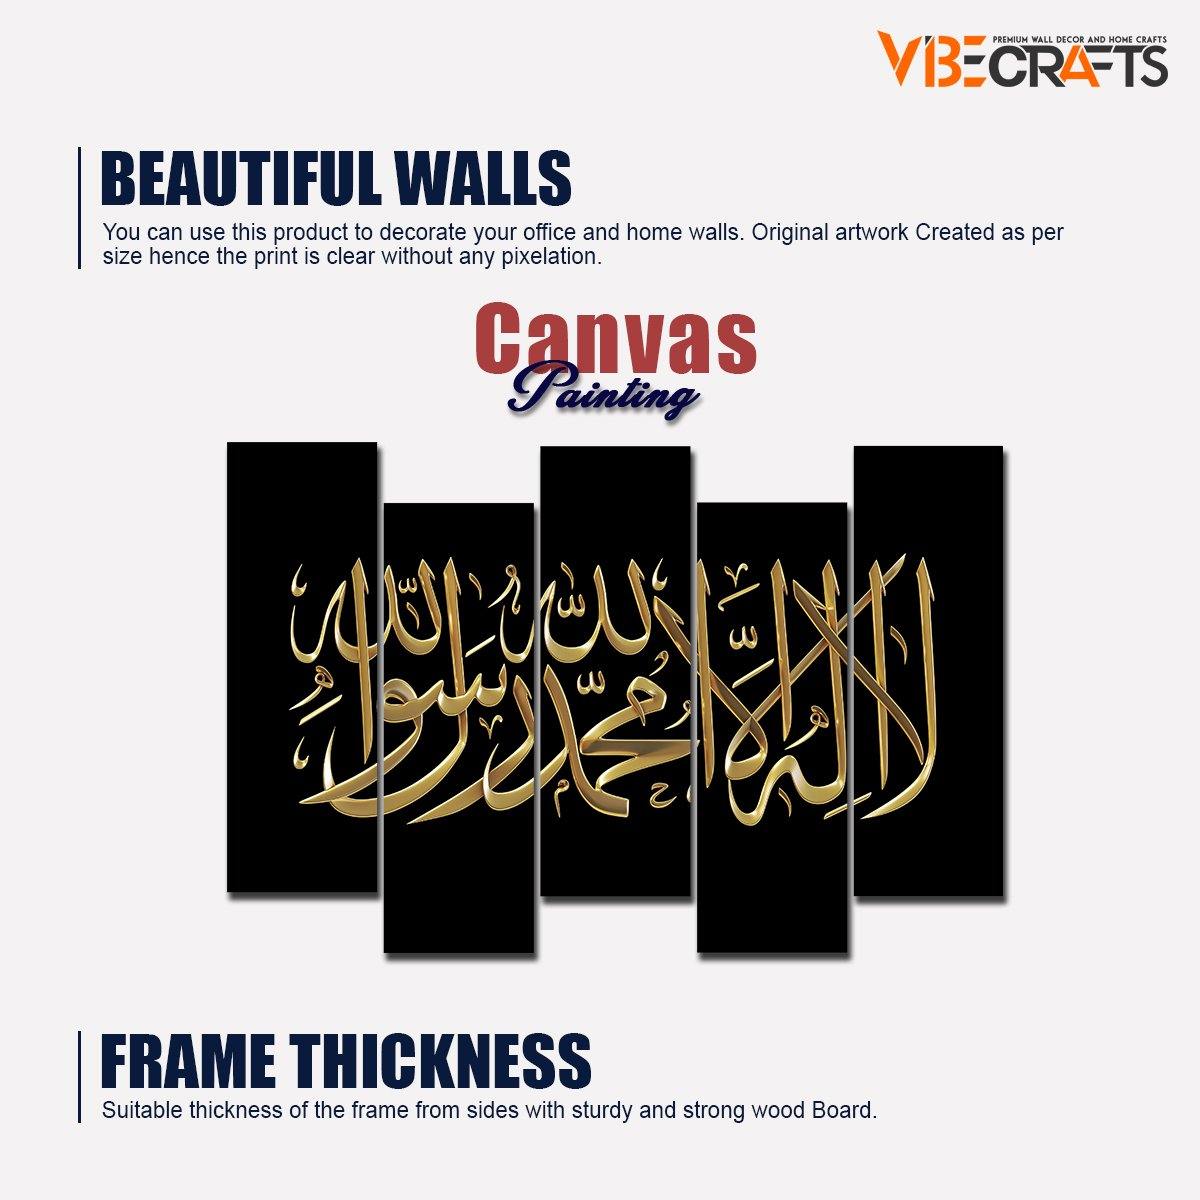 Shahada Islamic Calligraphy Wall Painting of Five Pieces